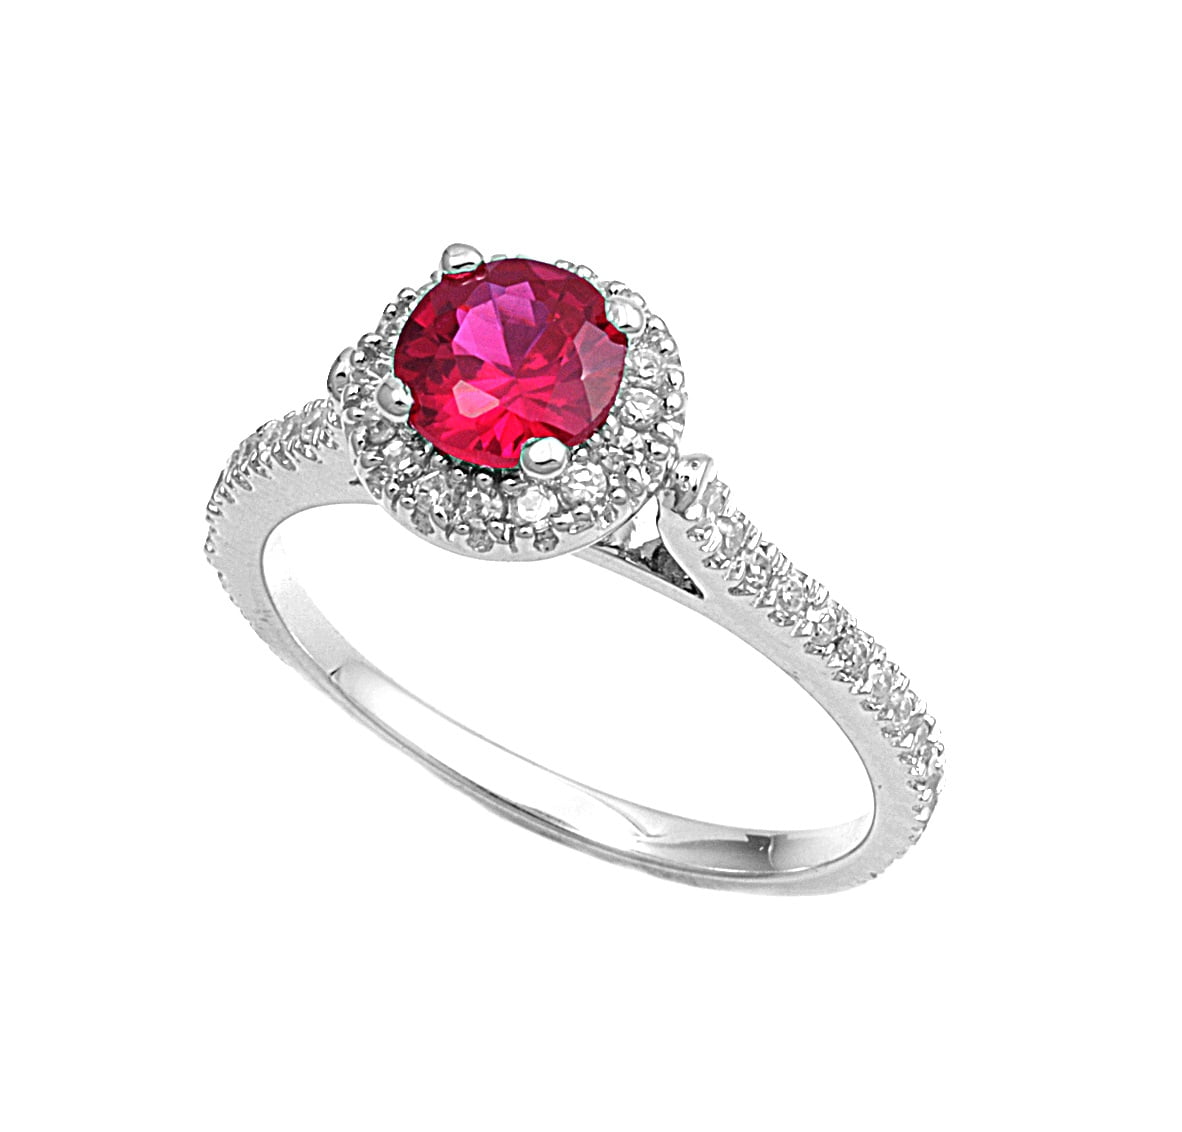 Round Cut Ruby CZ Stone 925 Sterling Silver Ring SSR9